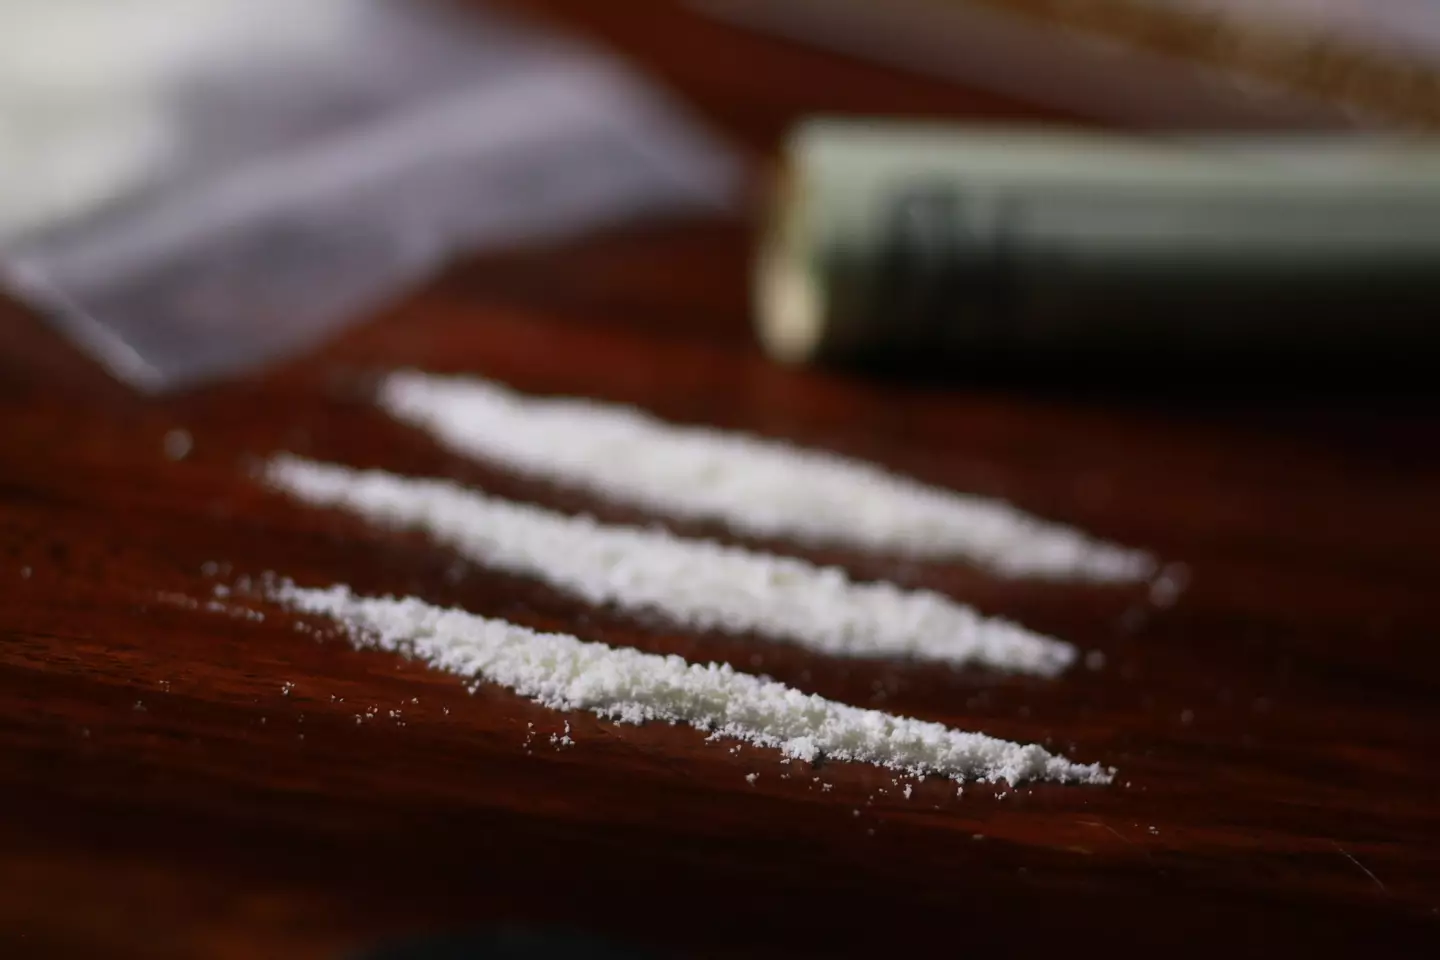 The study looked at how certain people become addicted to cocaine.